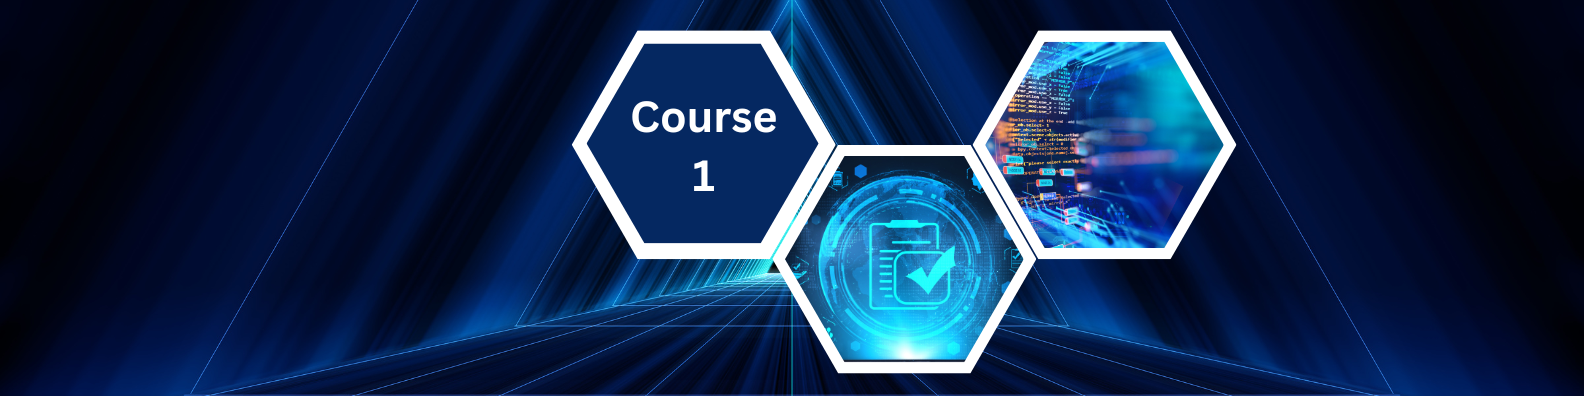 Compliance Foundations Course 1 banner